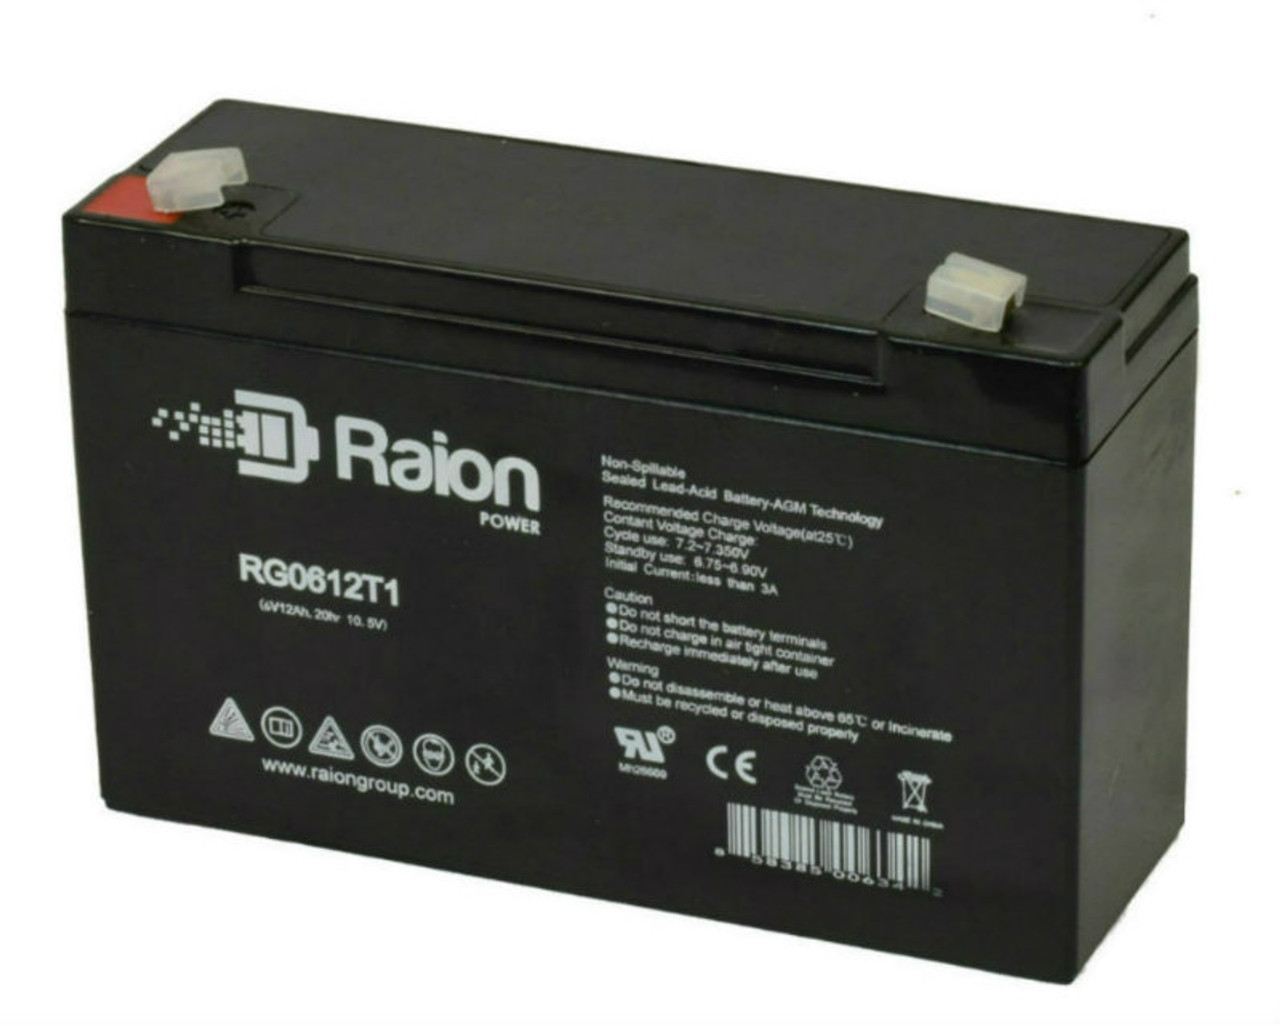 Raion Power RG06120T1 Replacement Battery for Neuton Power NP6120